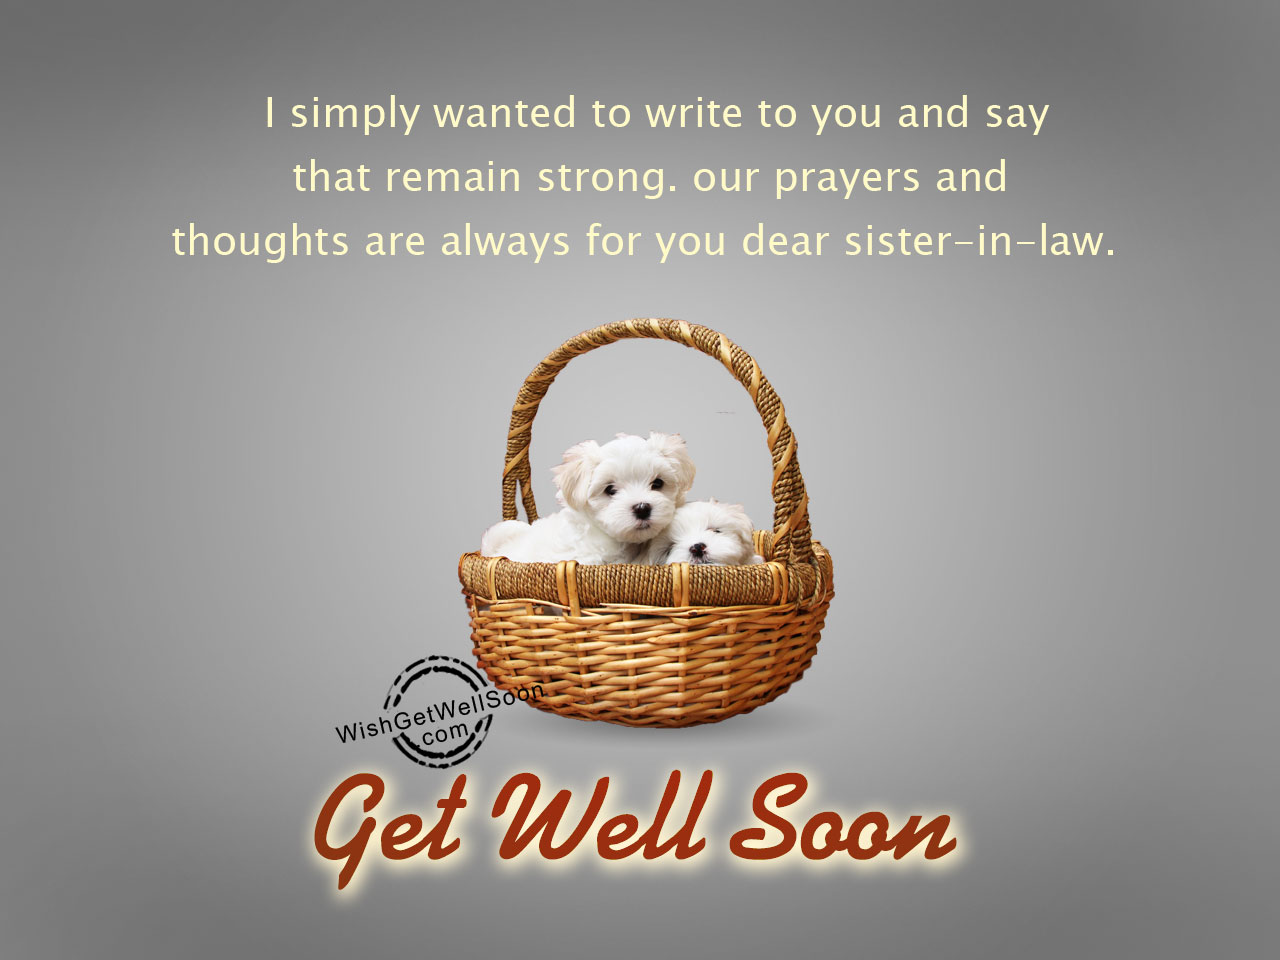 I simply wanted to write get well soon